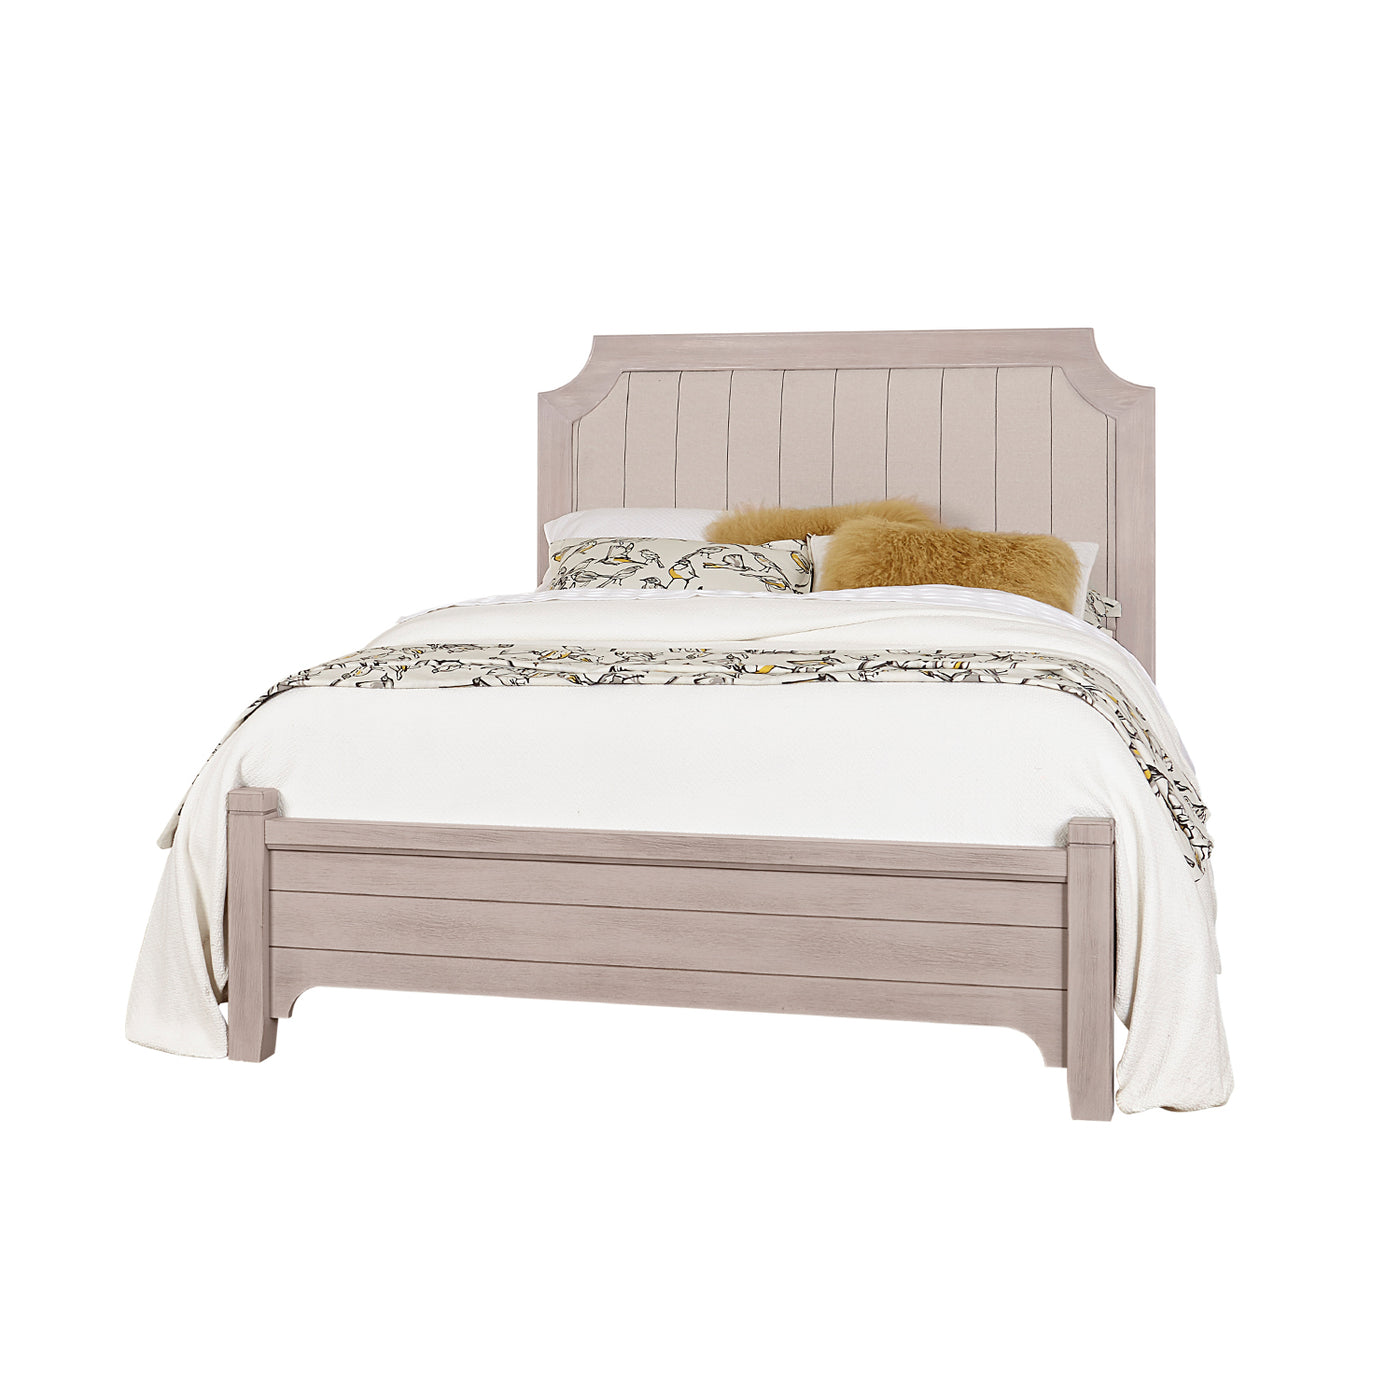 LMCo. Bungalow Collection Upholstered Bed with Low Profile Footboard - King and Queen